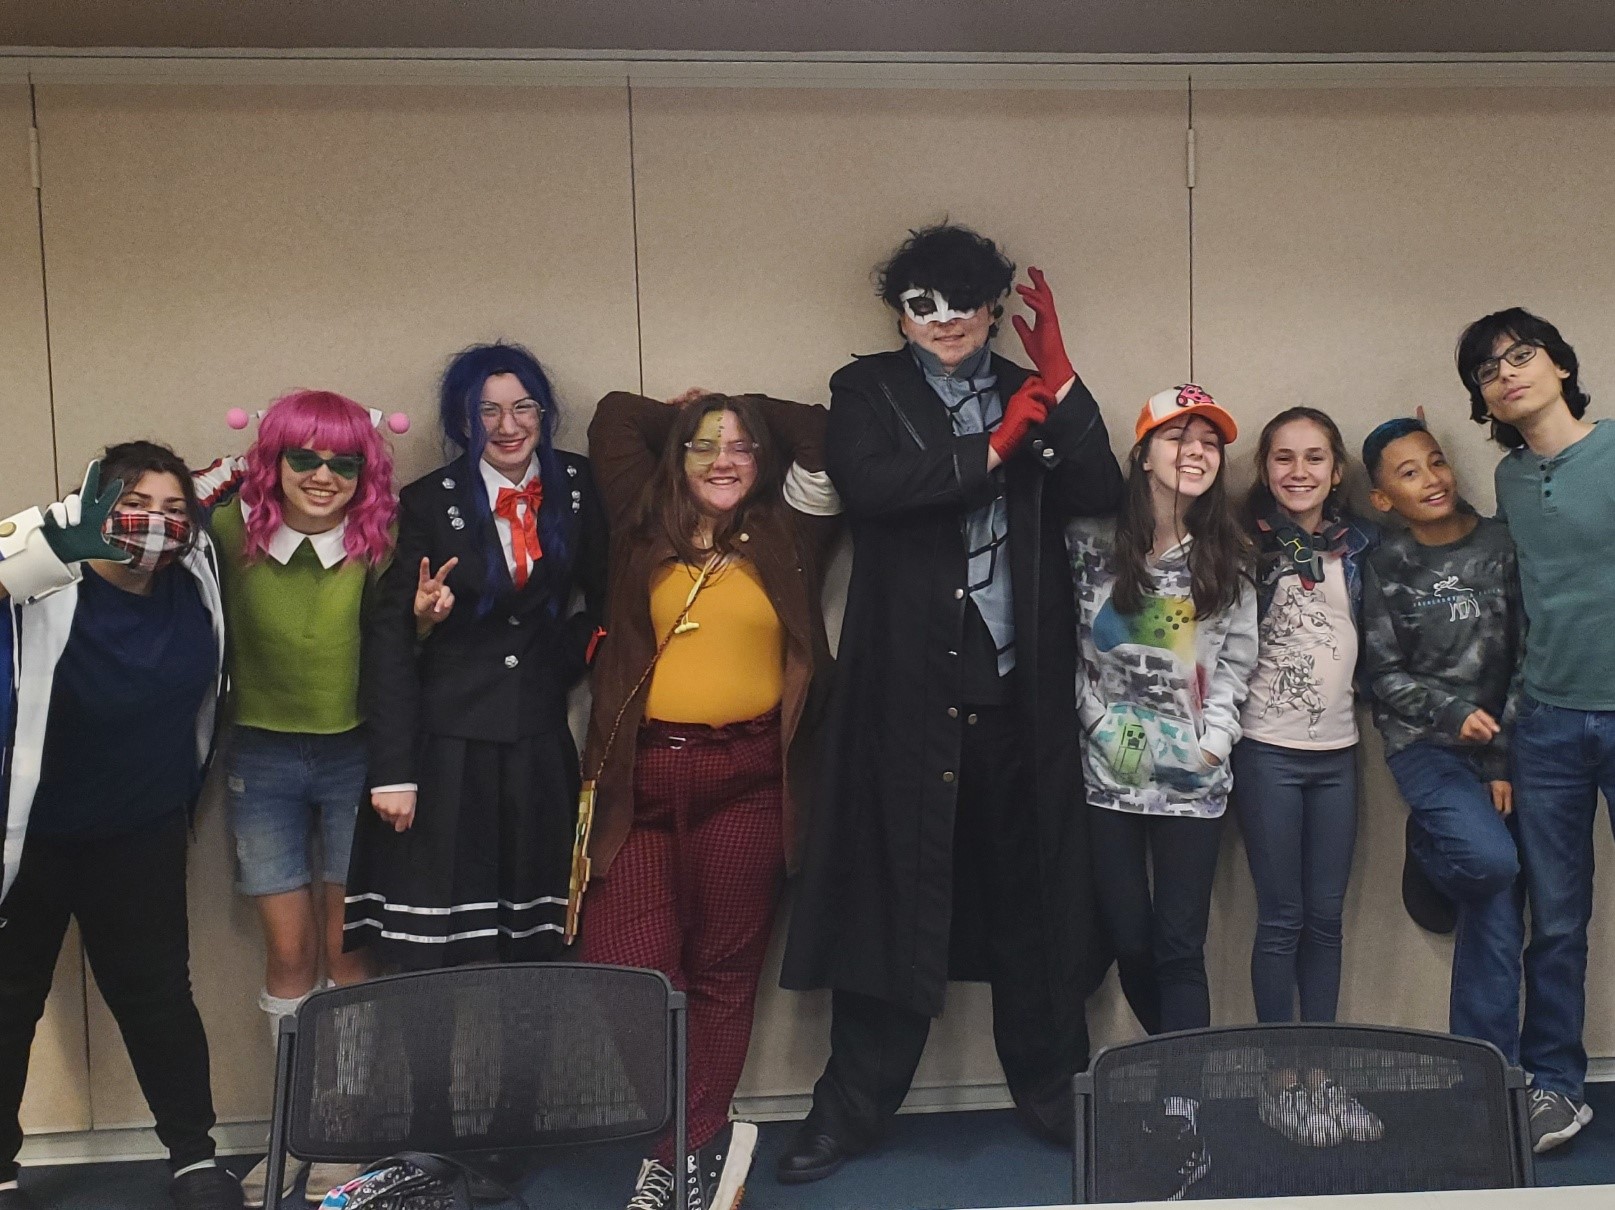 SmithCon group photo showing costume contest participants